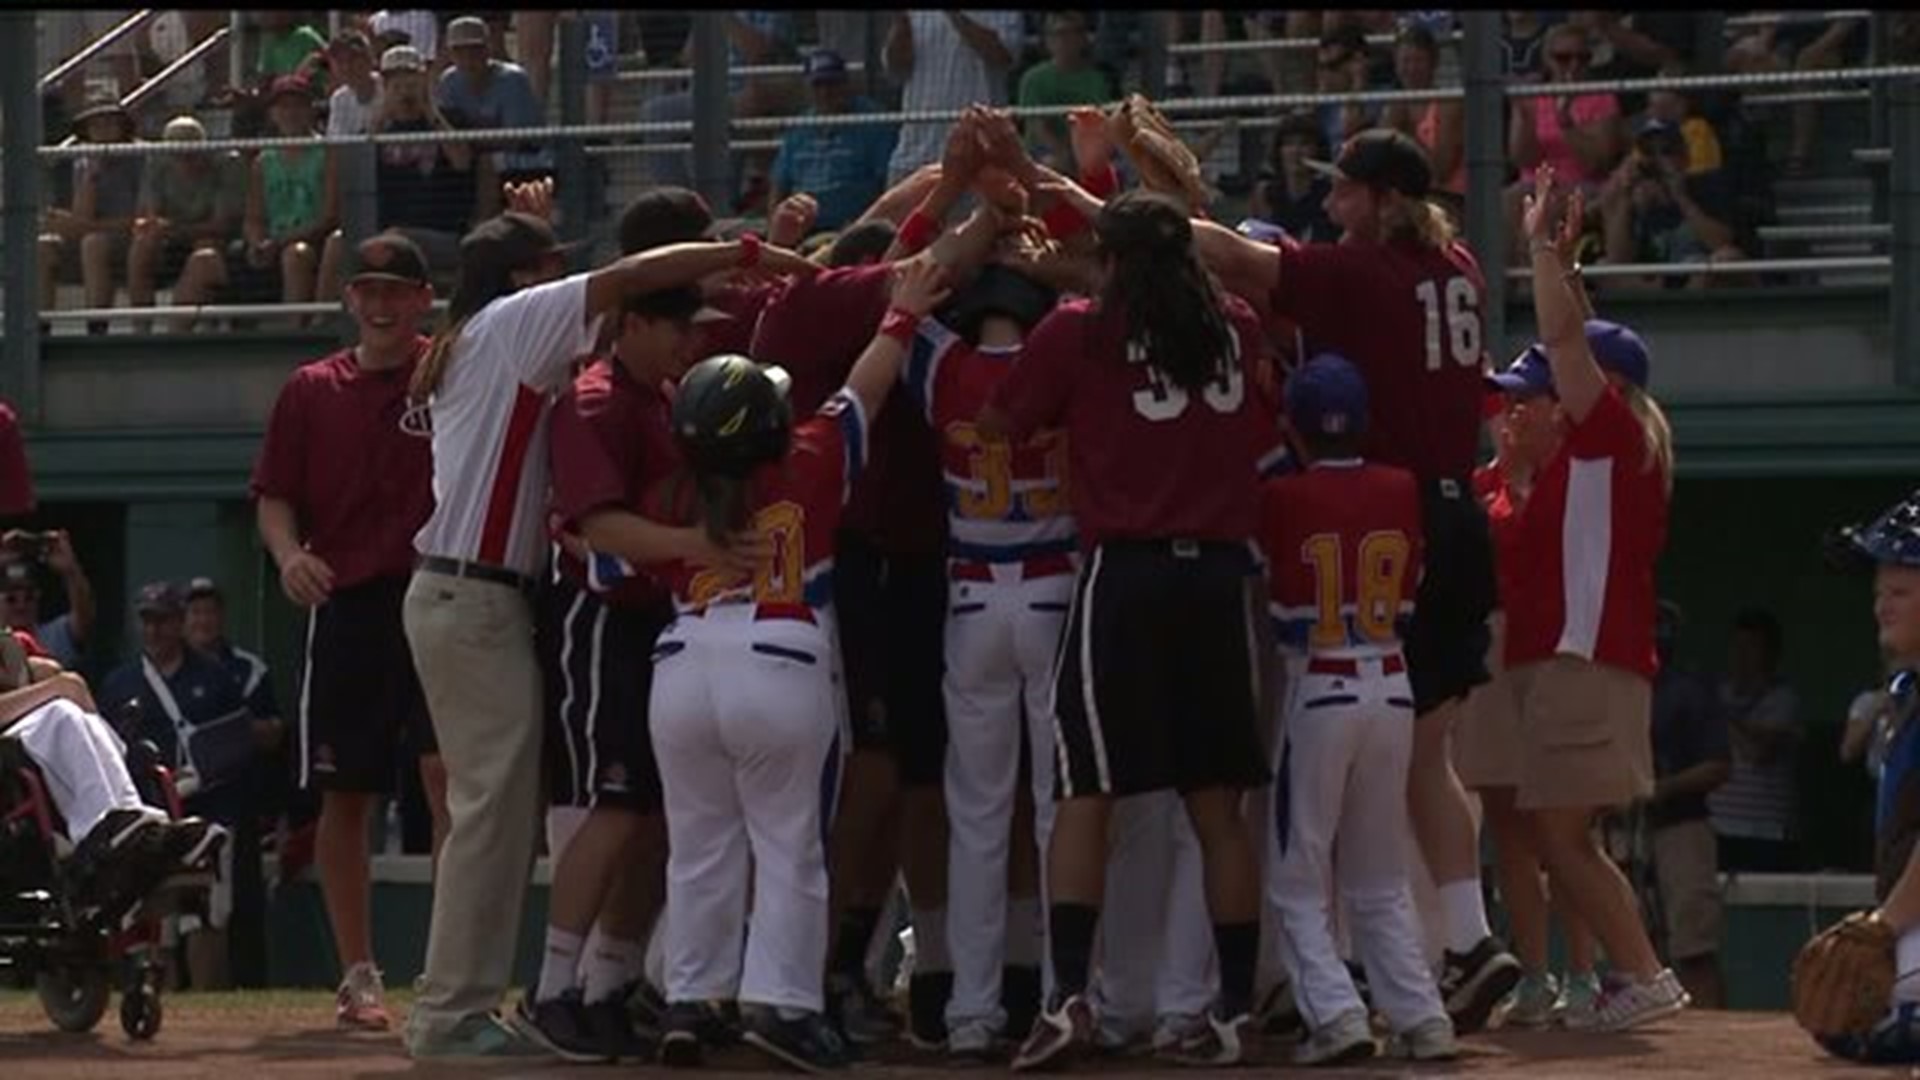 Camp Hill challenger baseball team competes in Little League World Series